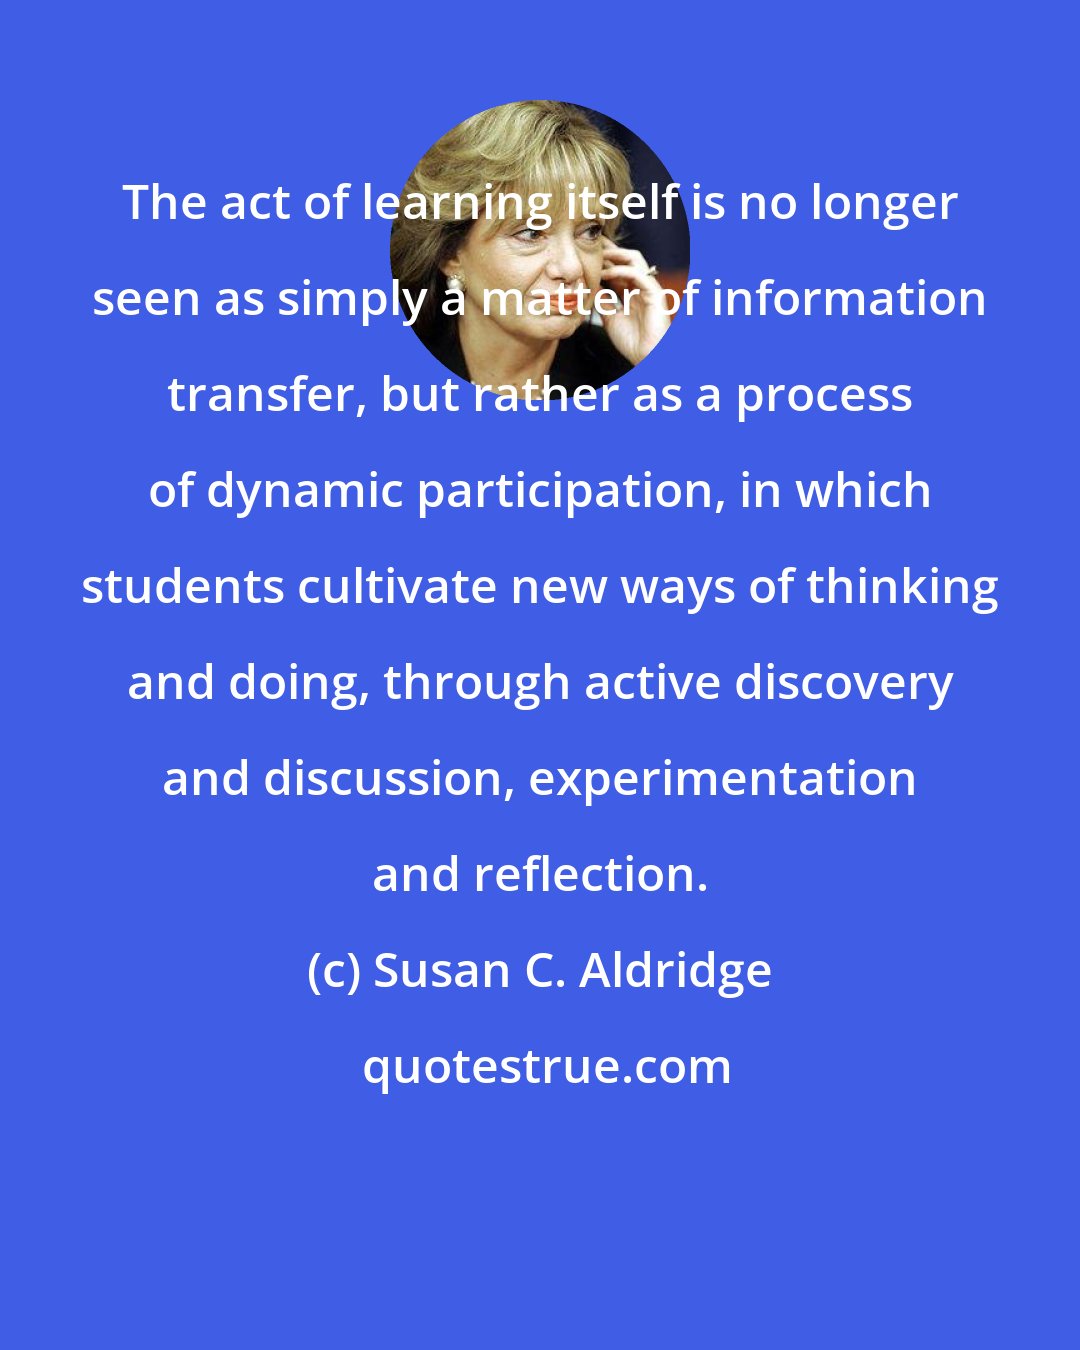 Susan C. Aldridge: The act of learning itself is no longer seen as simply a matter of information transfer, but rather as a process of dynamic participation, in which students cultivate new ways of thinking and doing, through active discovery and discussion, experimentation and reflection.